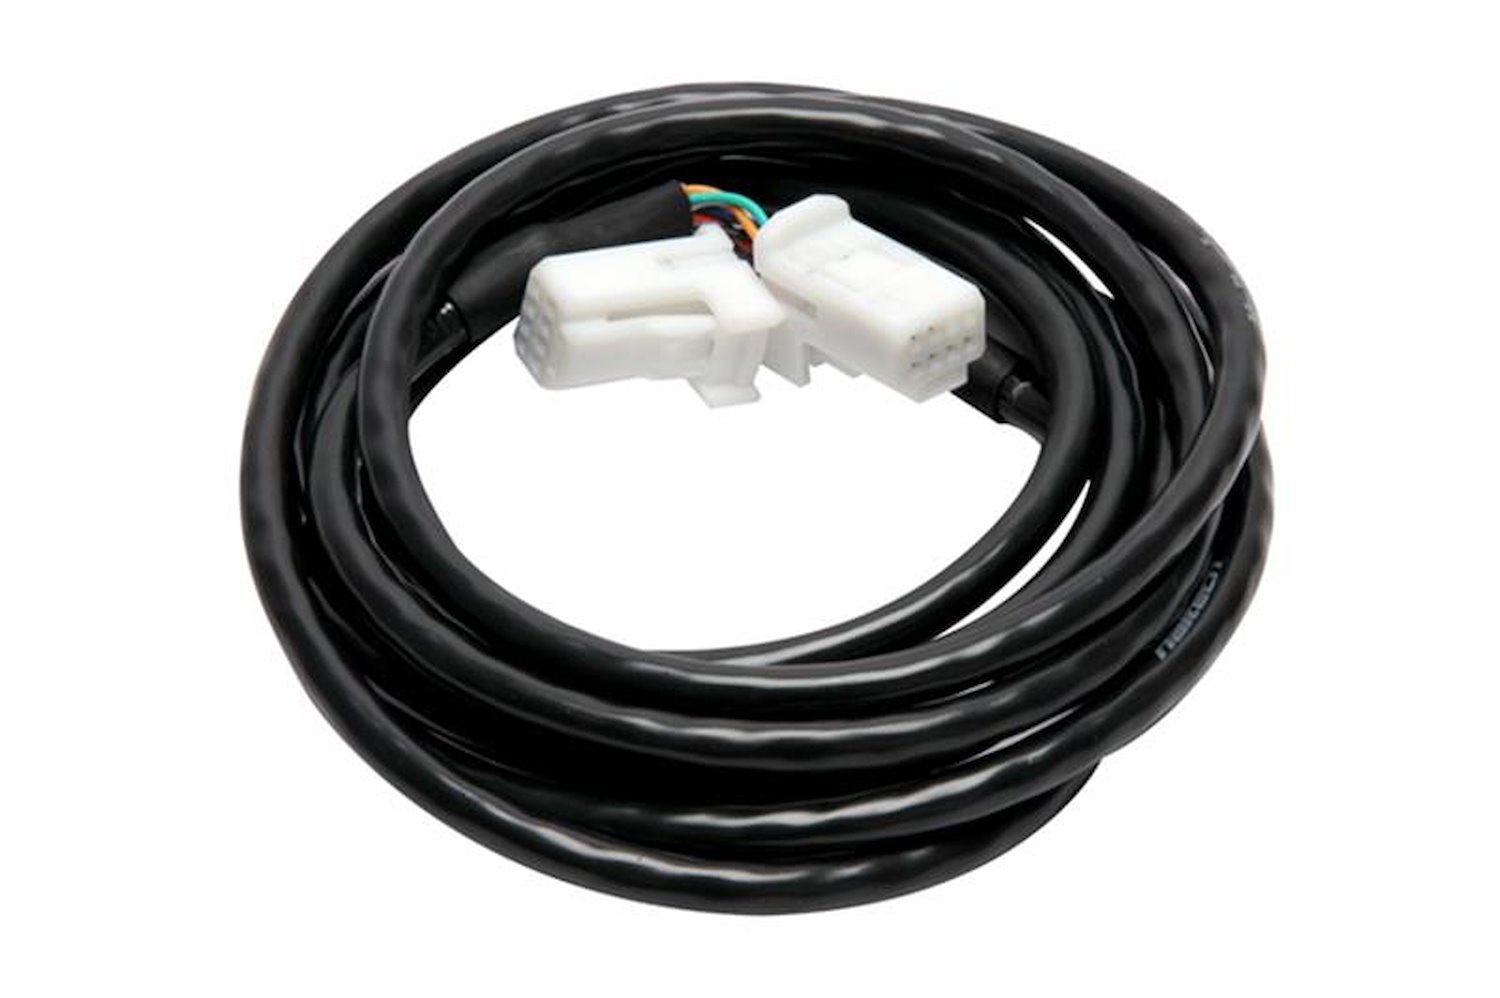 HT-040061 CAN Cable, 8-Pin, White, Tyco, 1200 mm (48 in.)